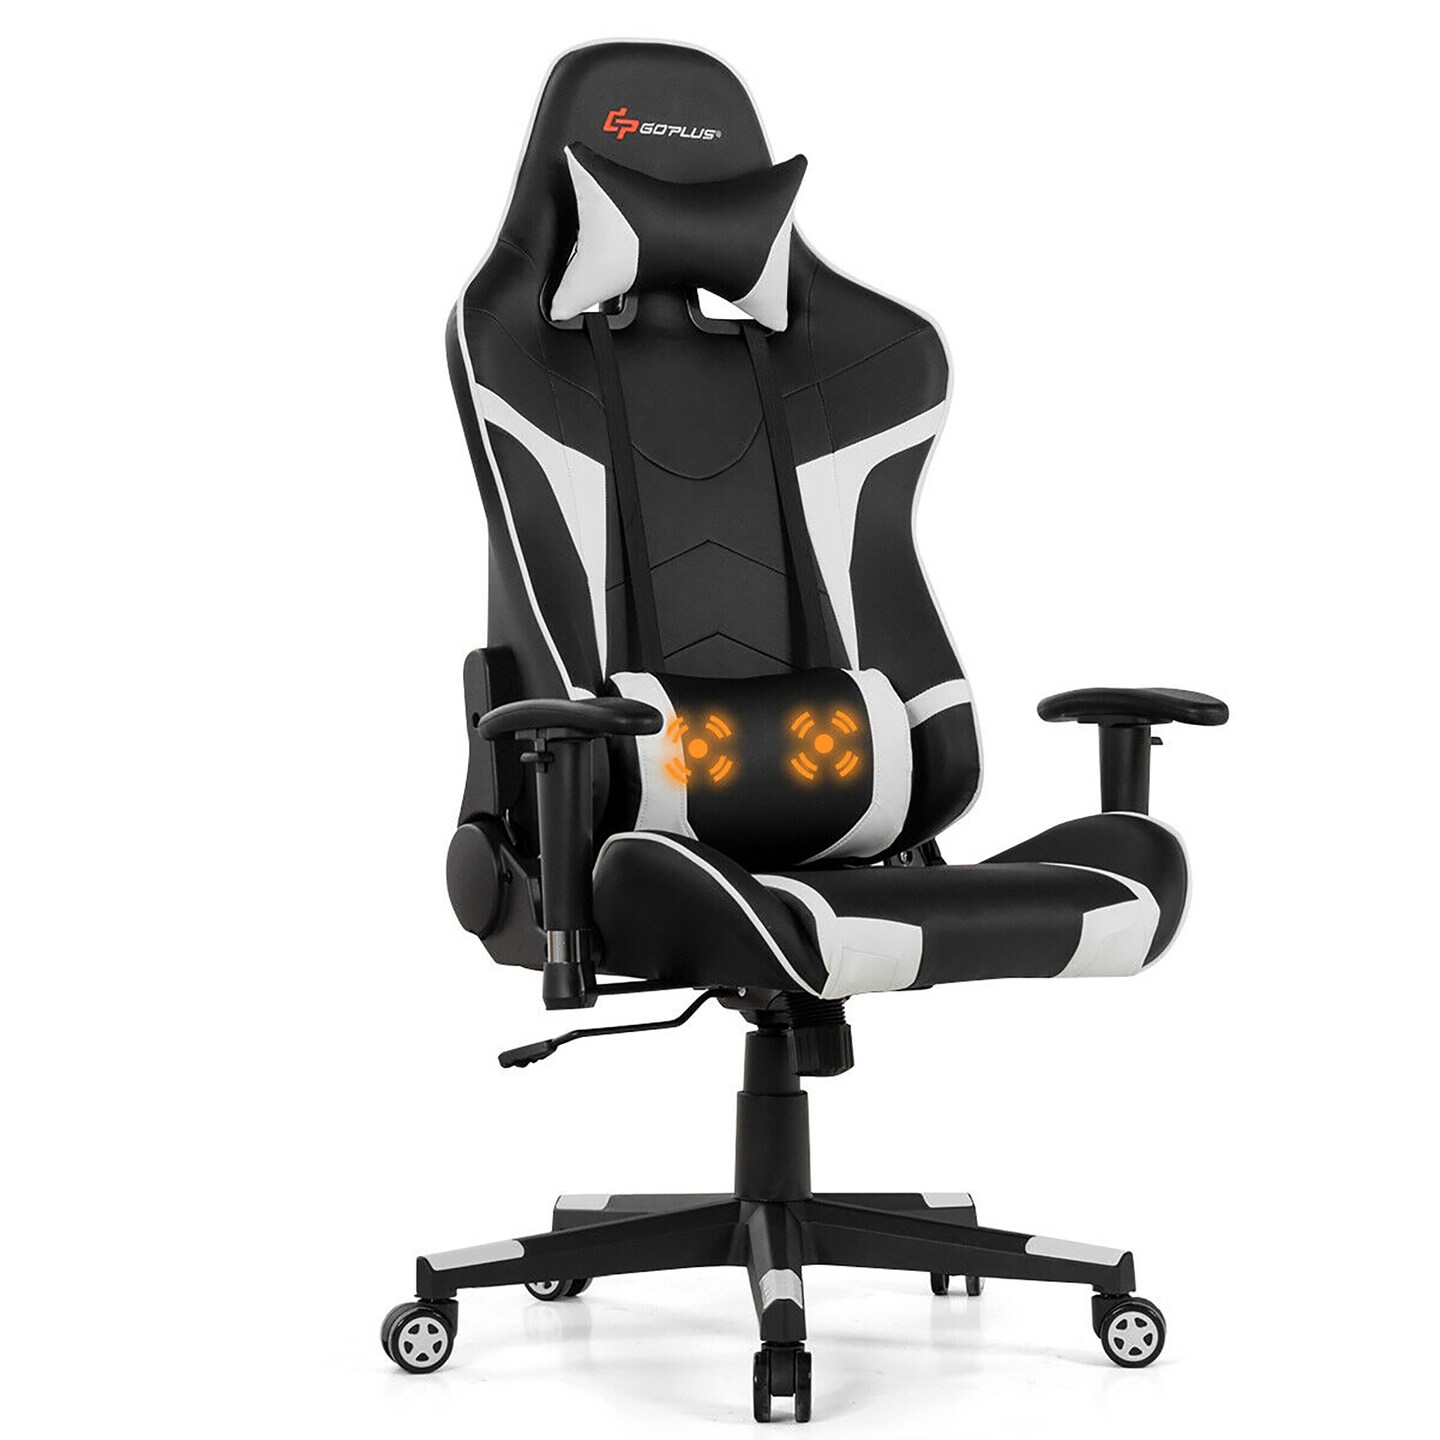 X20 Blue and Black Gaming Swivel Chair